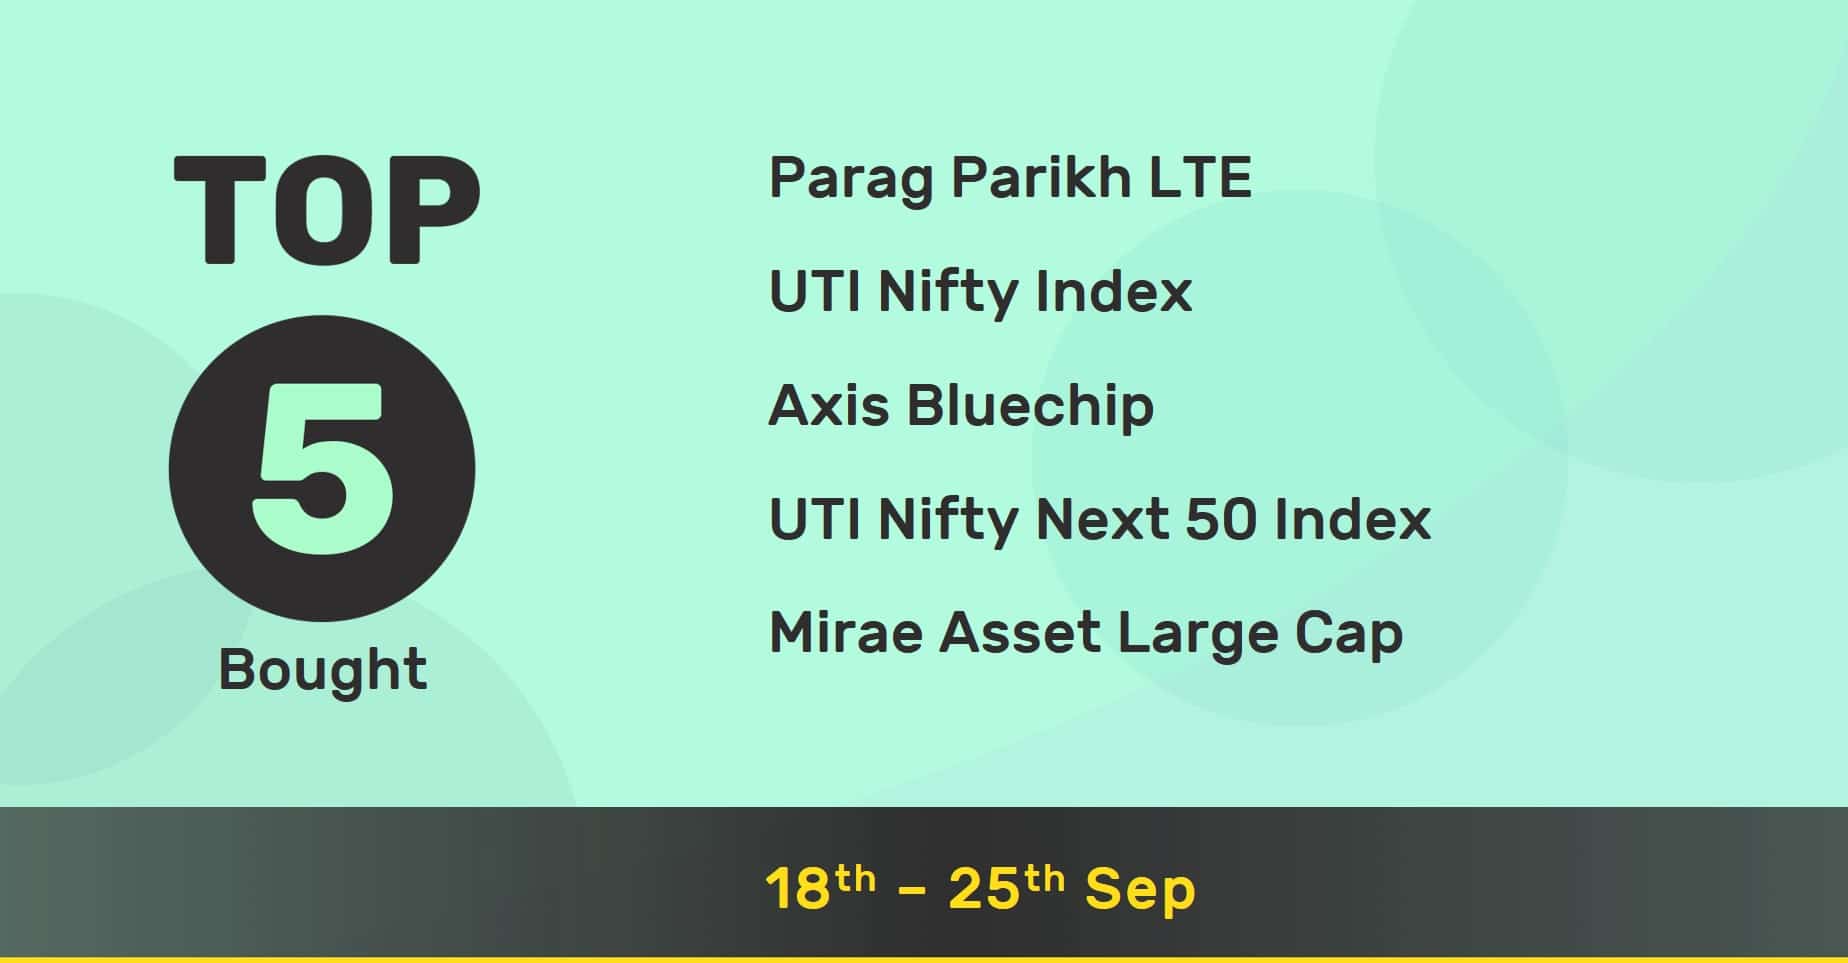 Top news and market movers ⚡ this week: 25th Sep’ 20